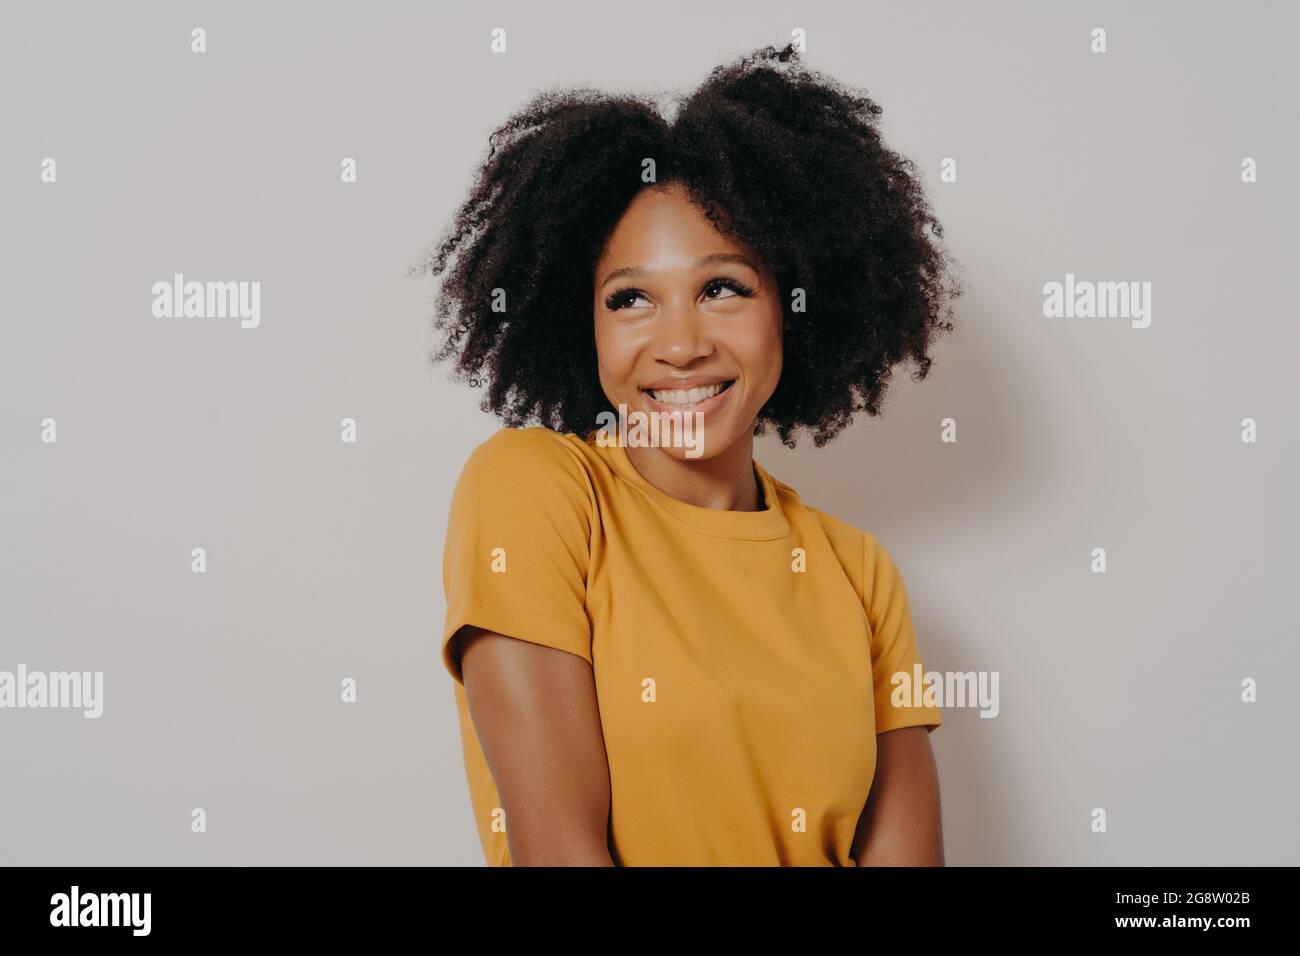 Studio shot close up portrait of casually dressed african american girl with funny face expression Stock Photo